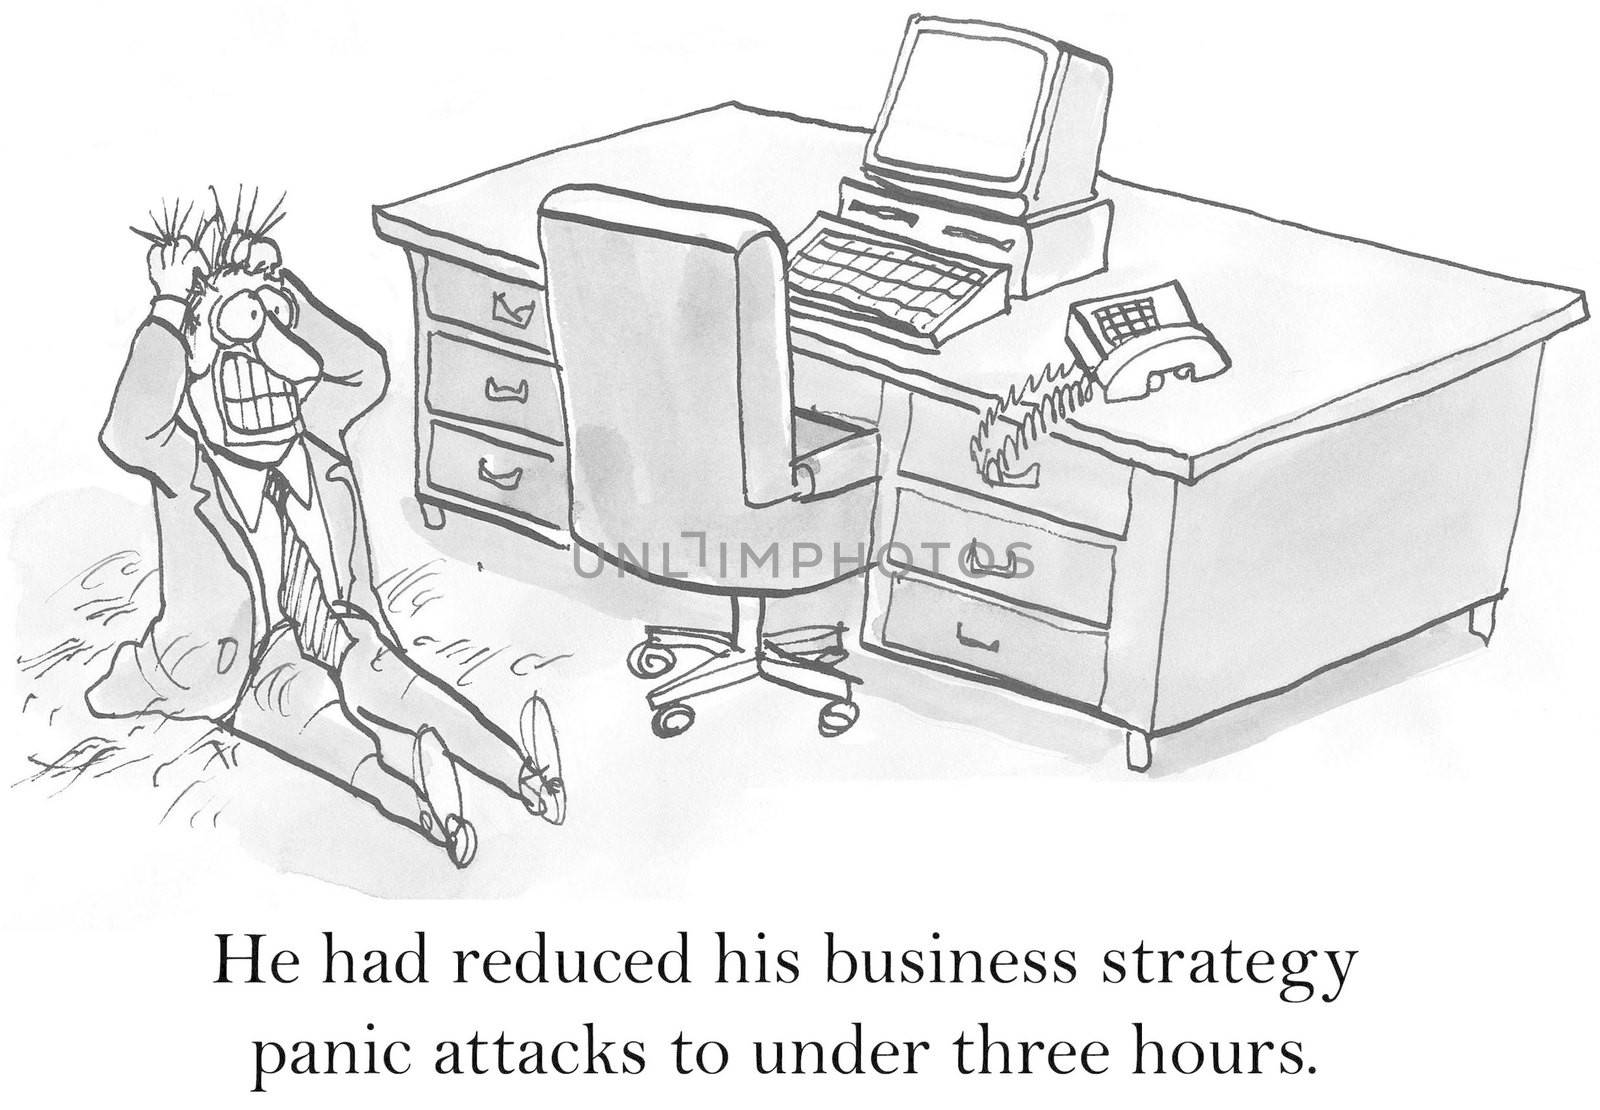 He had reduced his business strategy panic attacks to under three hours.